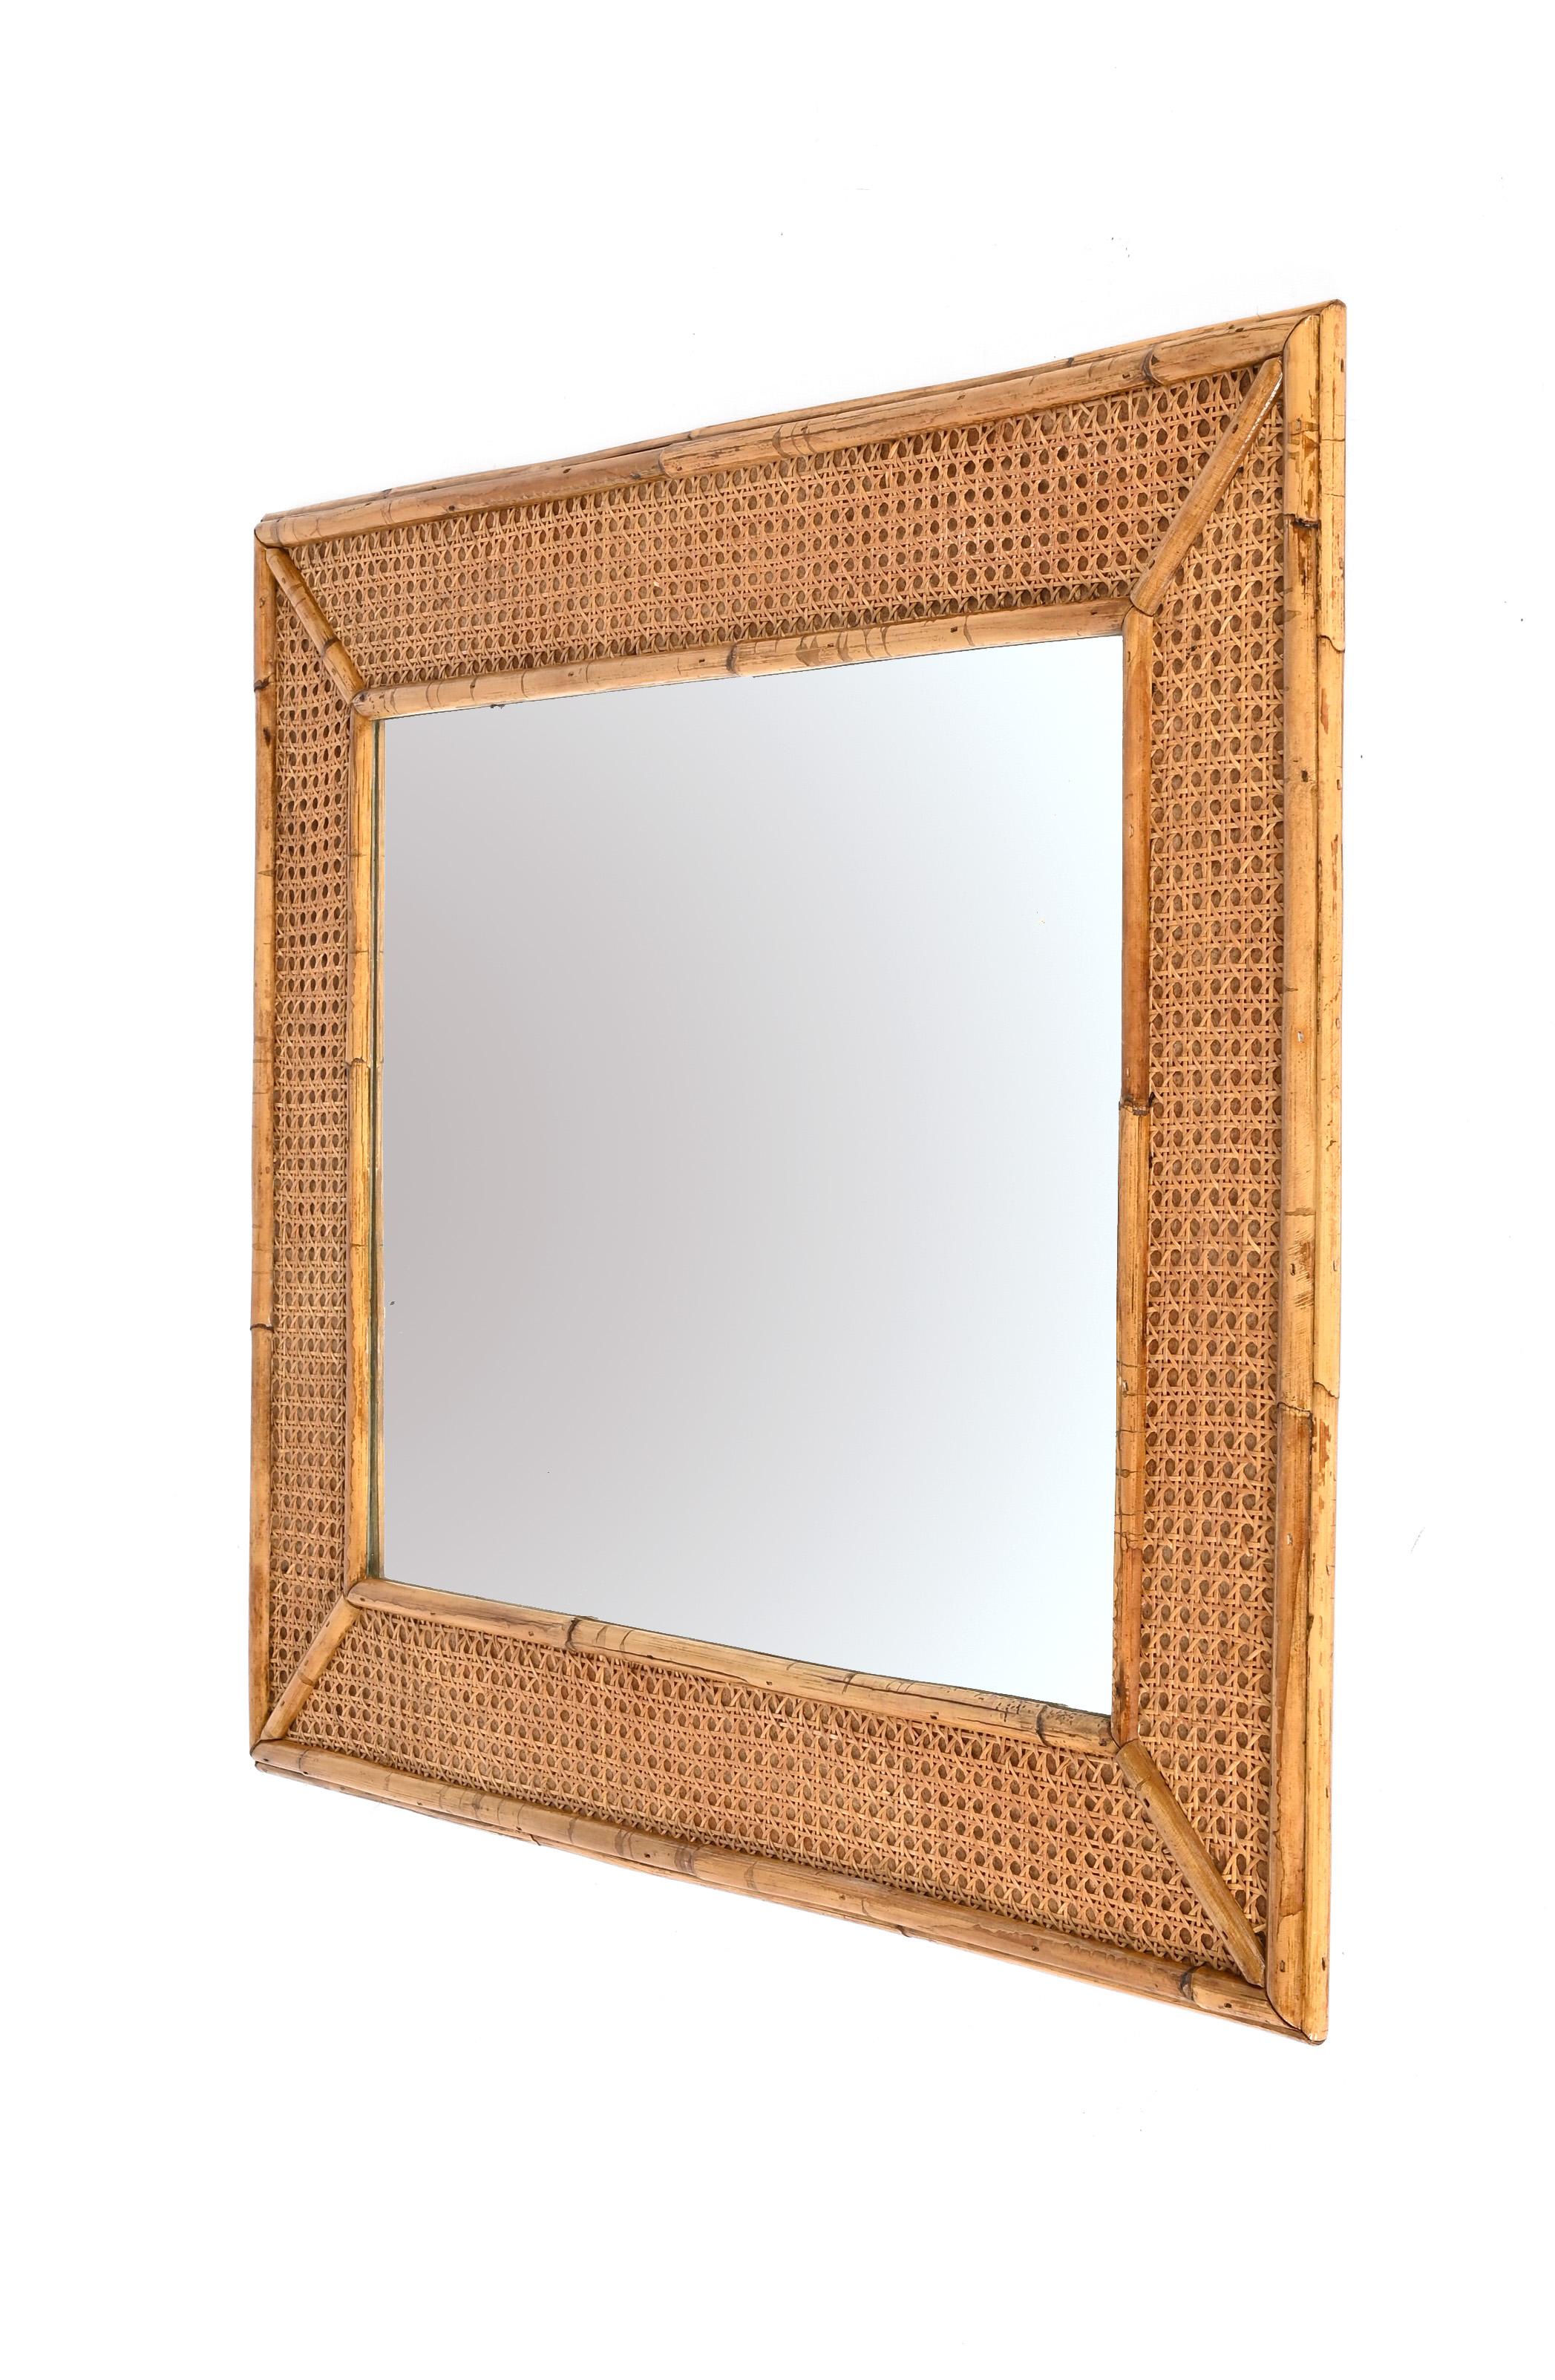 Midcentury Rectangular Italian Mirror with Bamboo and Vienna Straw Frame, 1970s For Sale 10